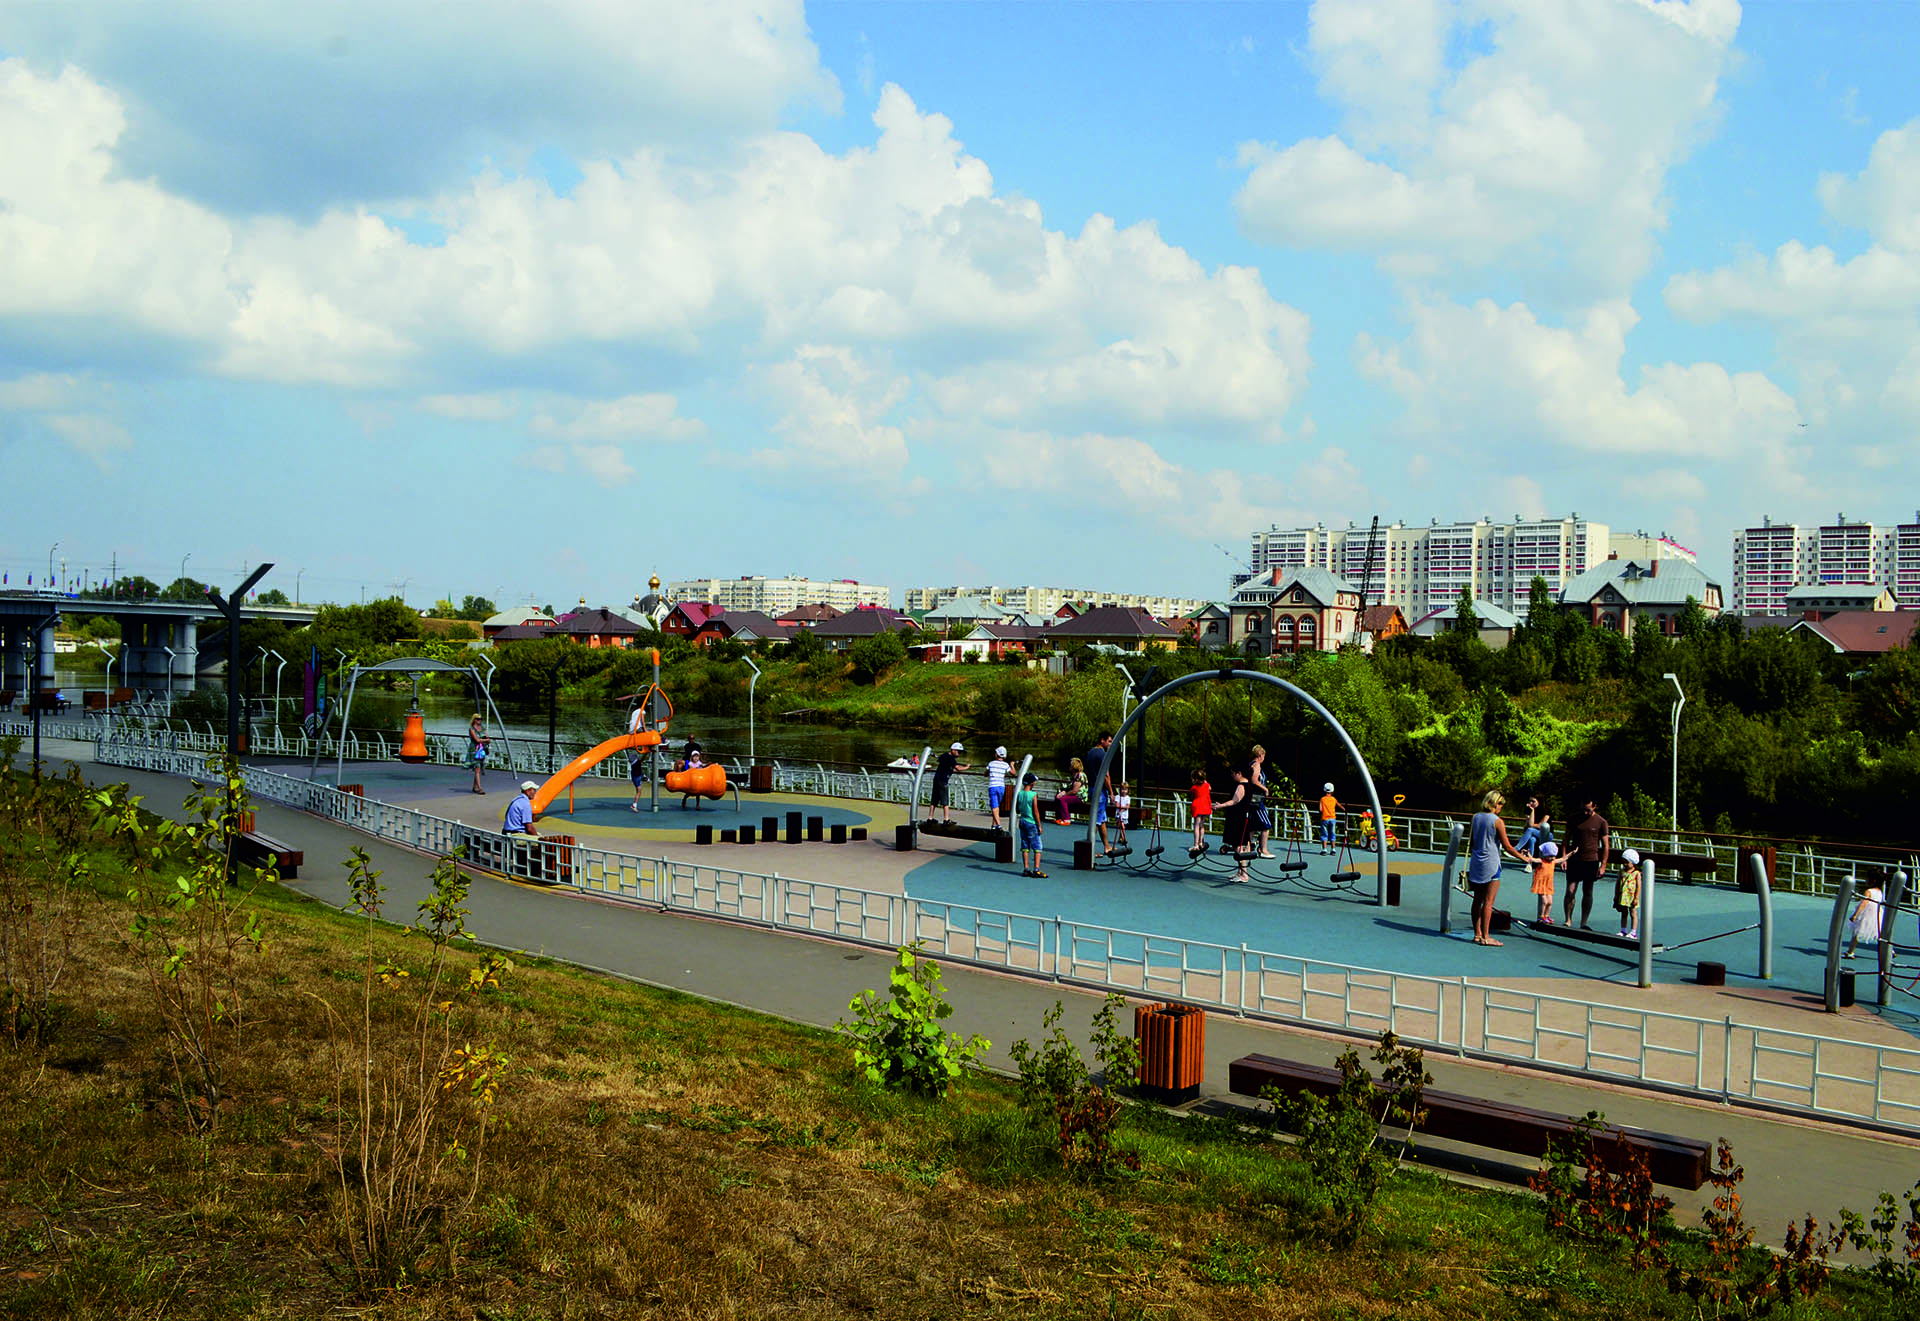 <p>This project involves the redevelopment of the riverfront area, part of an effort to upgrade the city’s infrastructure and provide more green public space.&nbsp;</p>